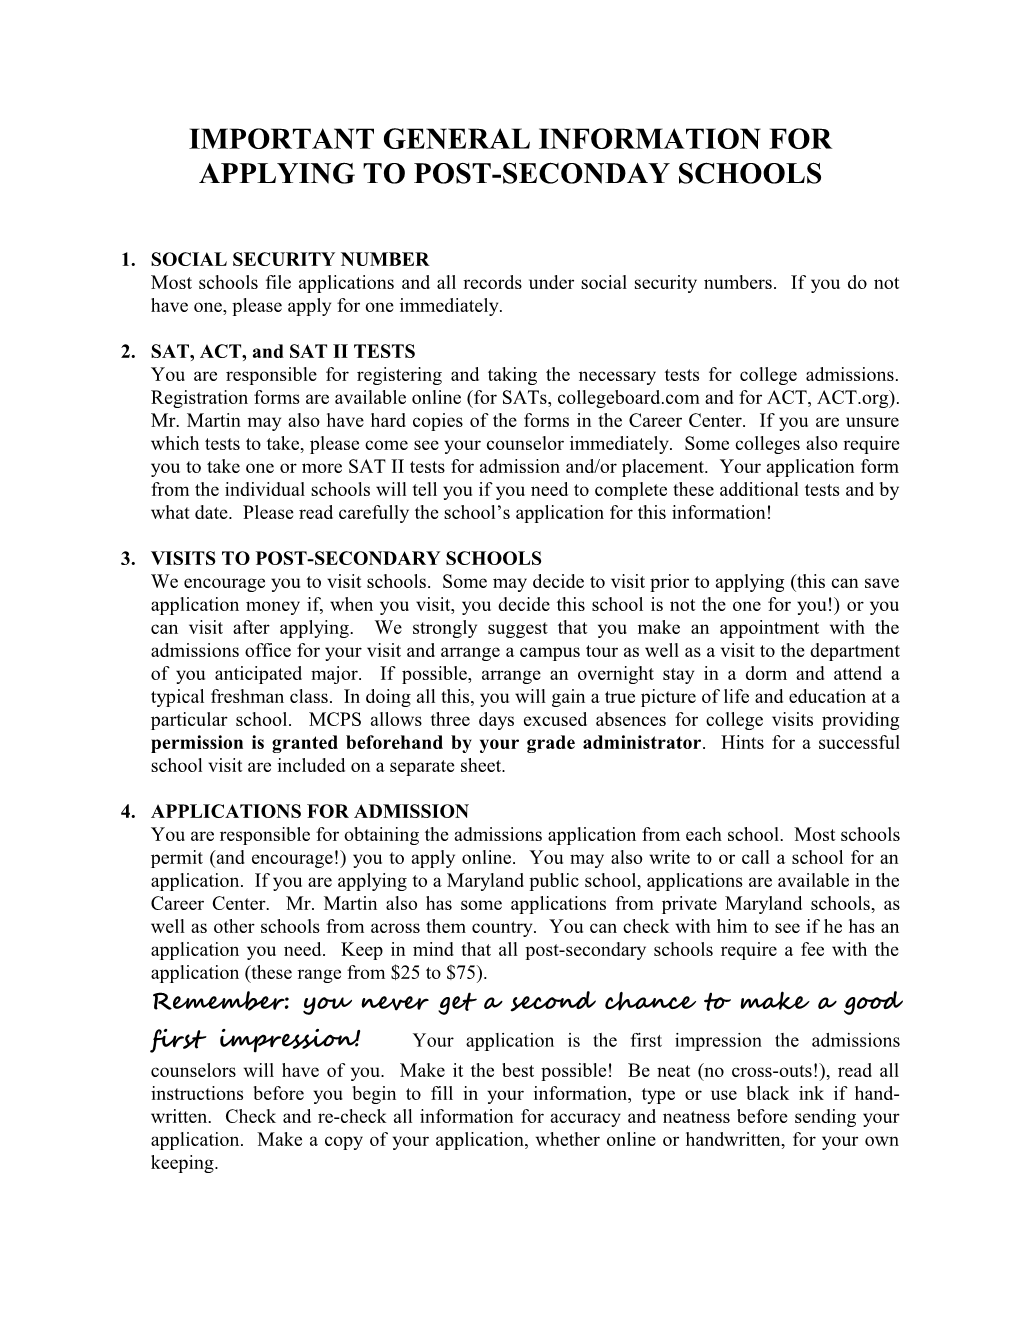 Important General Information for Applying to Post-Seconday Schools